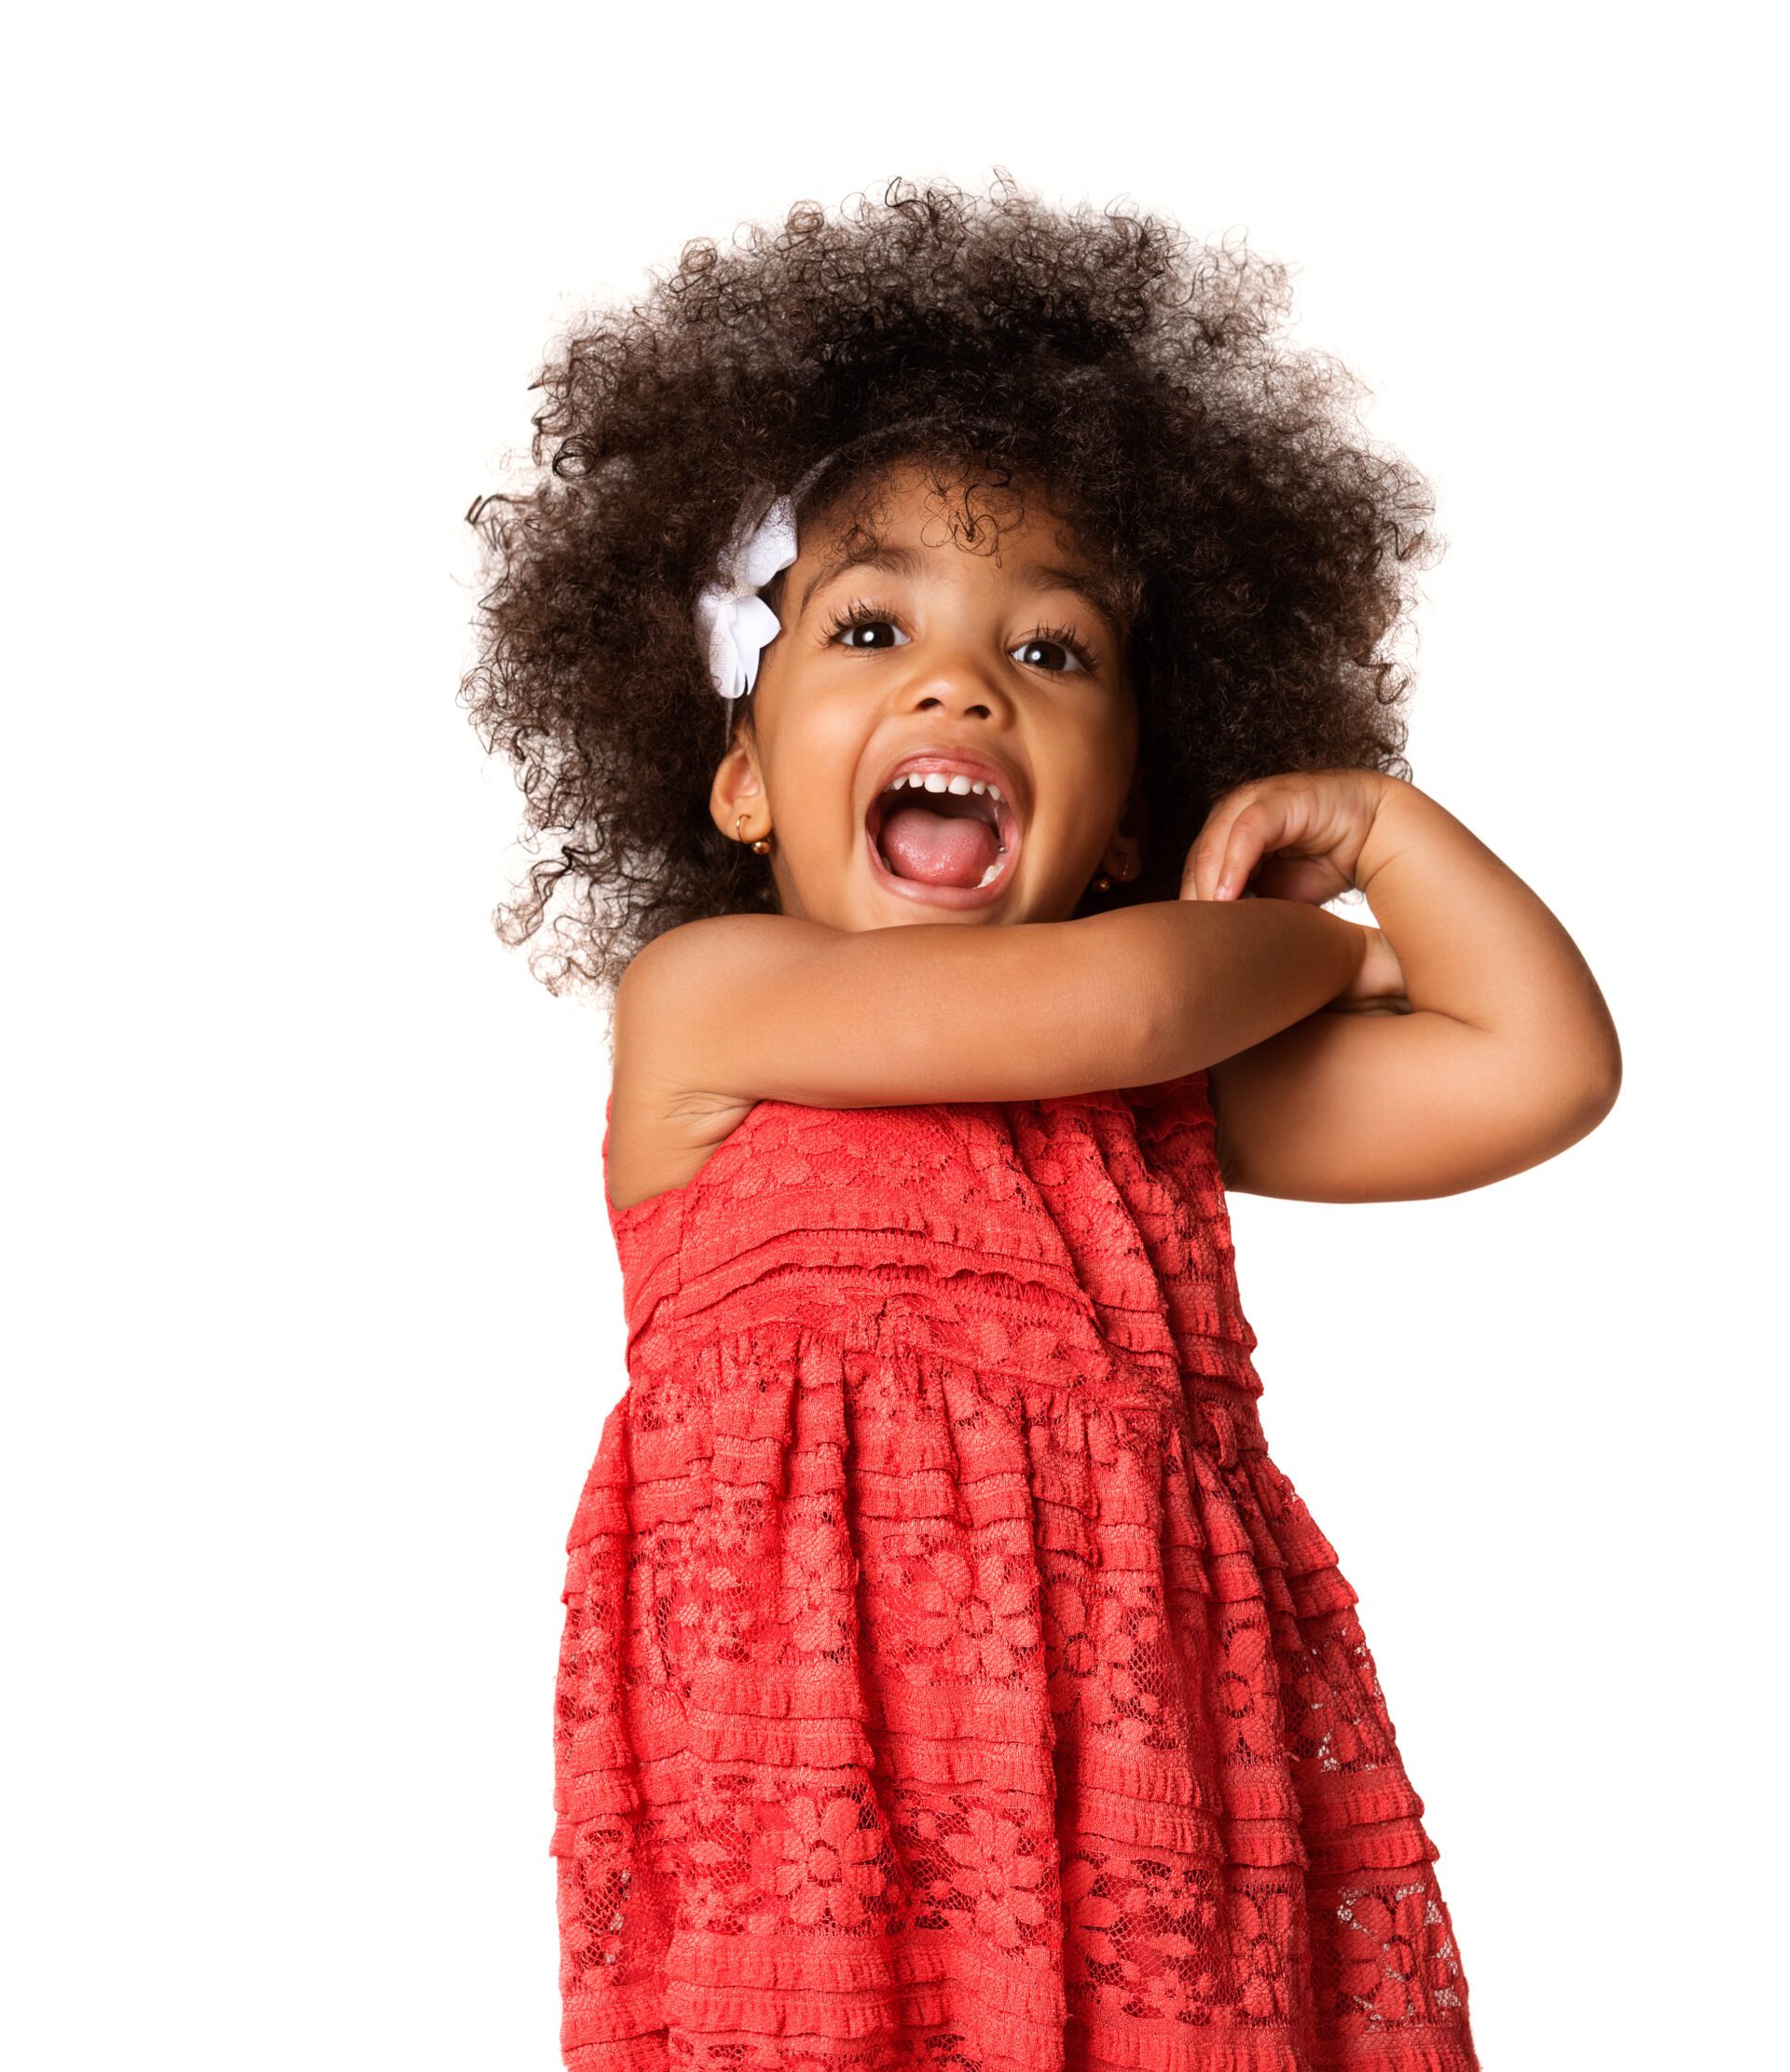 Portrait of cheerful little girl, isolated with copyspace